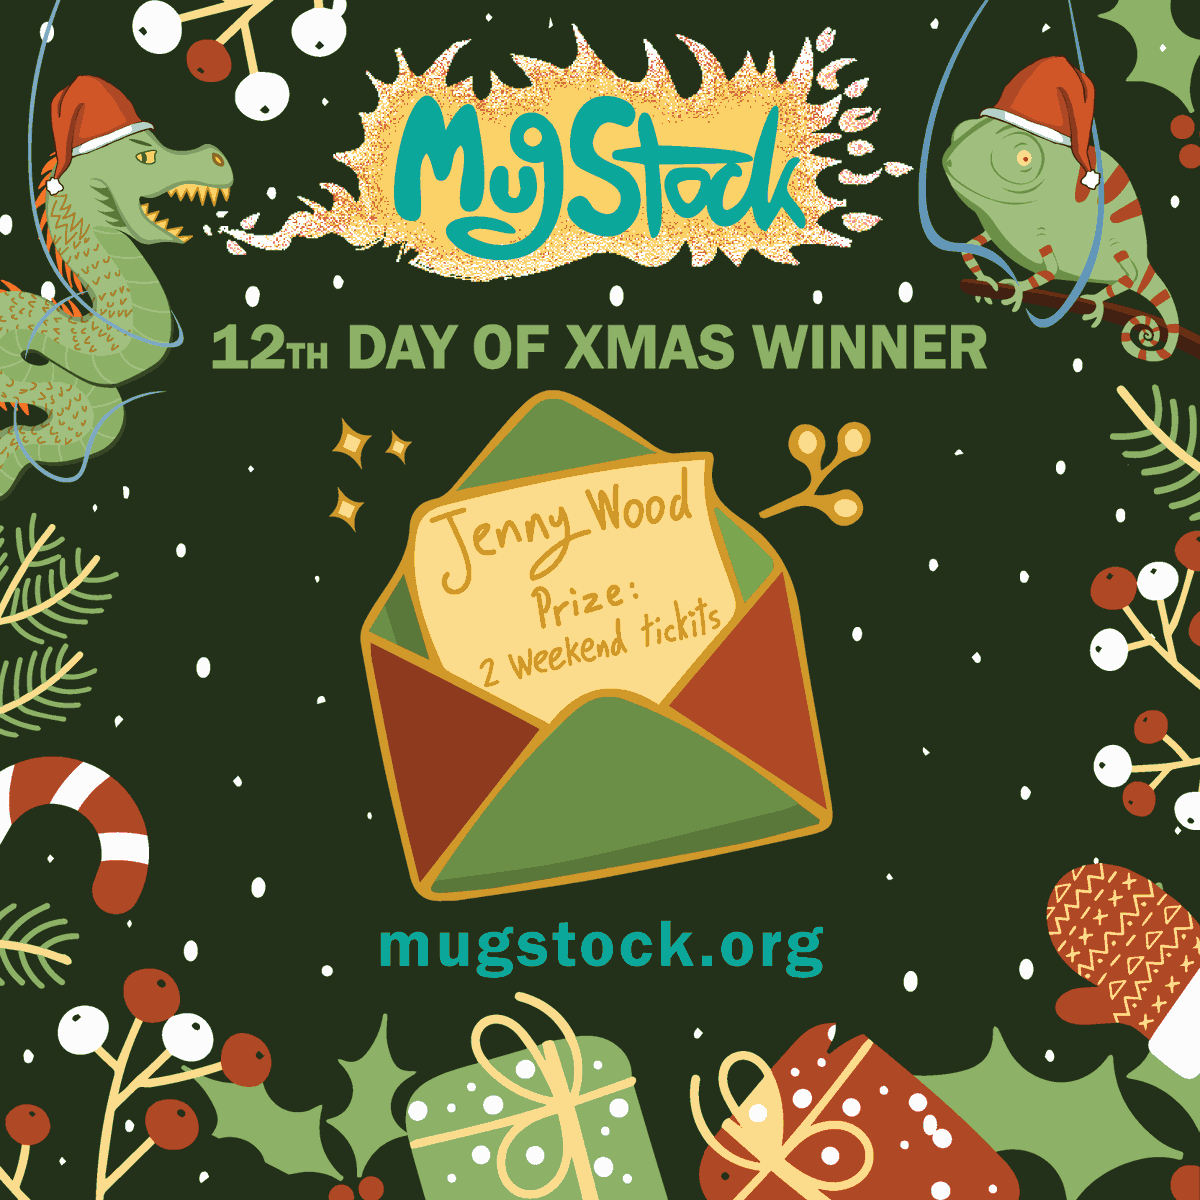 Congratulations to the 12th and final winner of our 12 Days of Christmas Giveaway for winning a pair of adult weekend tickets 🎫🎫 Remember, the MugStock monthly lottery will be drawn mid January – book your tickets soon to get a chance at doubling them mugstock.org/tickets/